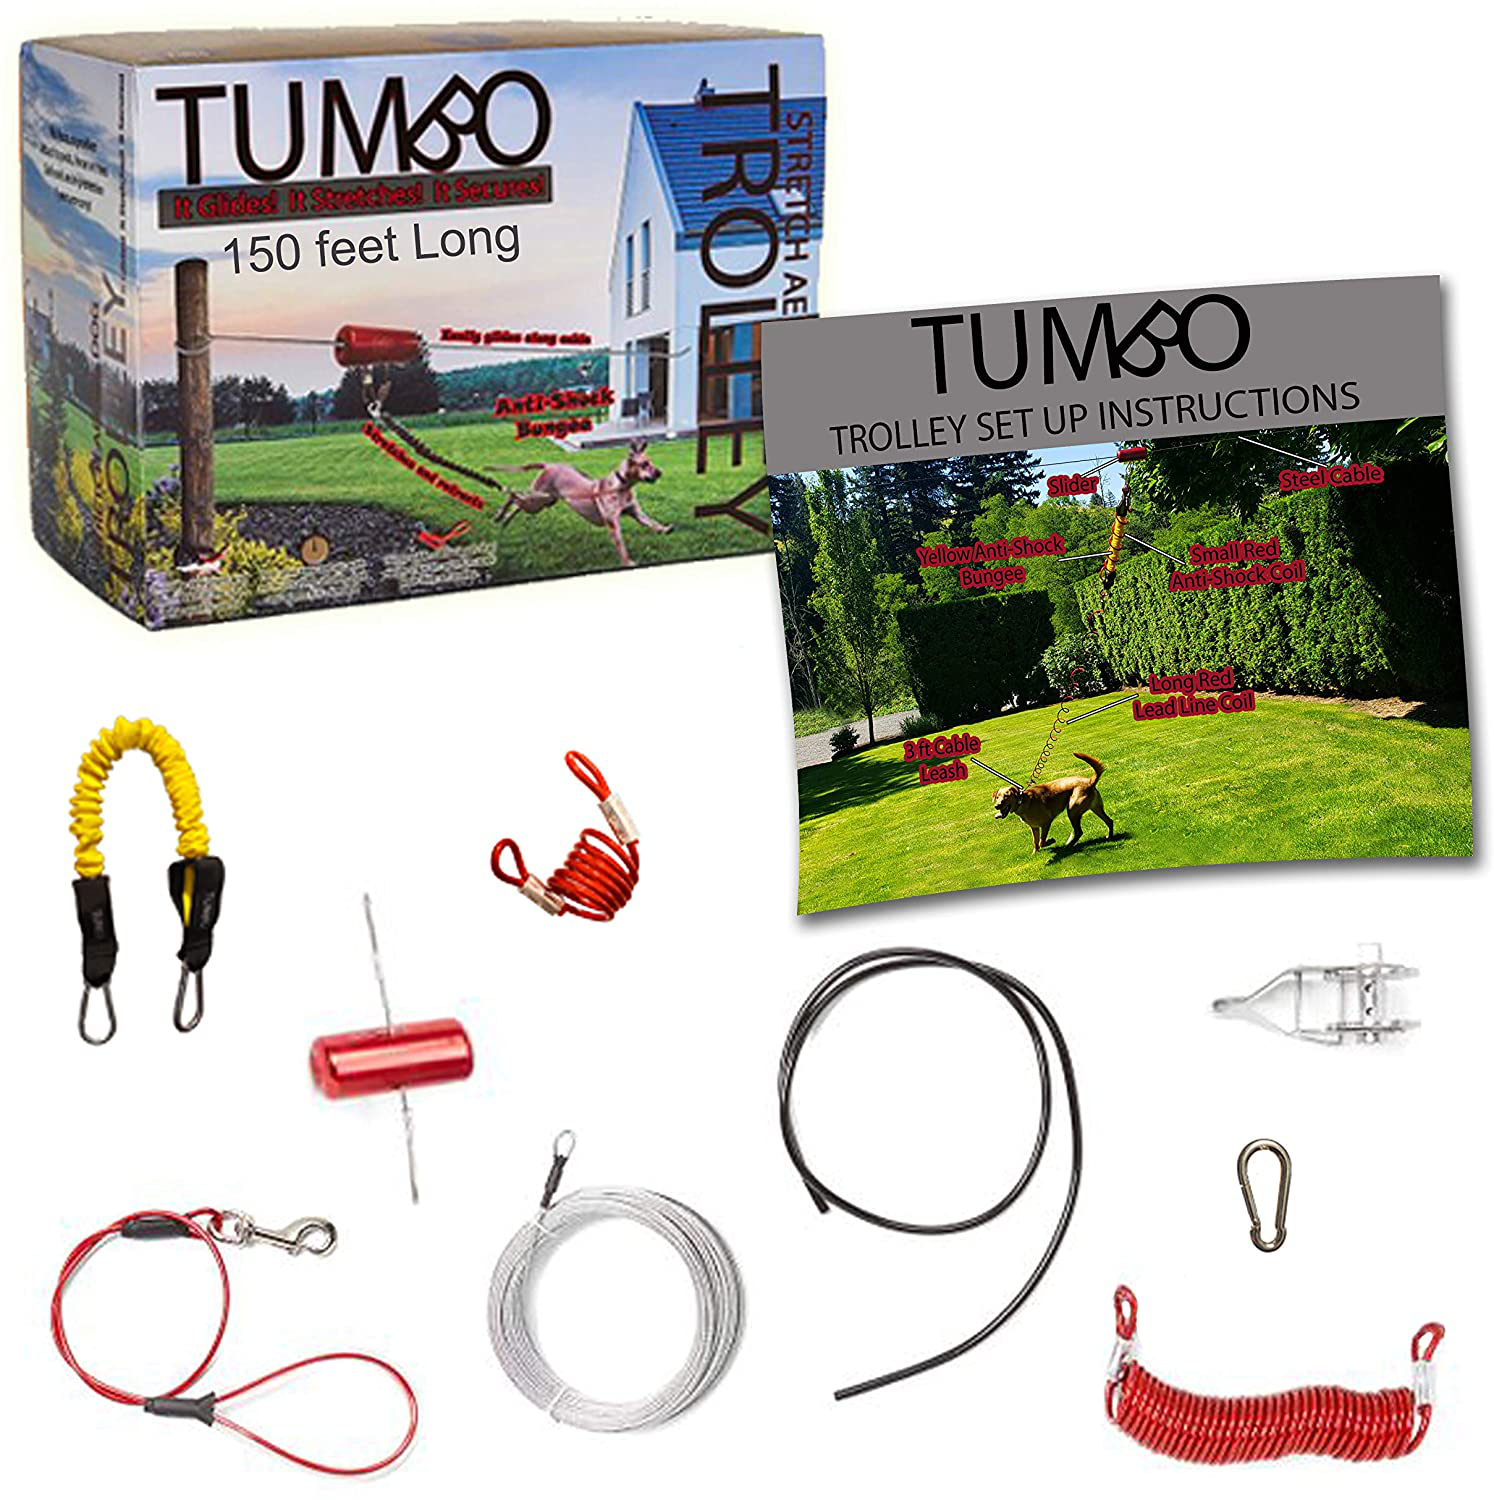 Tumbo Trolley Dog Containment System - Stretching Coil Cable with Anti-Shock Bungee (Safer and Less Tangles) Aerial Dog Tie Out Animals & Pet Supplies > Pet Supplies > Dog Supplies > Dog Kennels & Runs Tumbo 150 ft Regular Trolley  